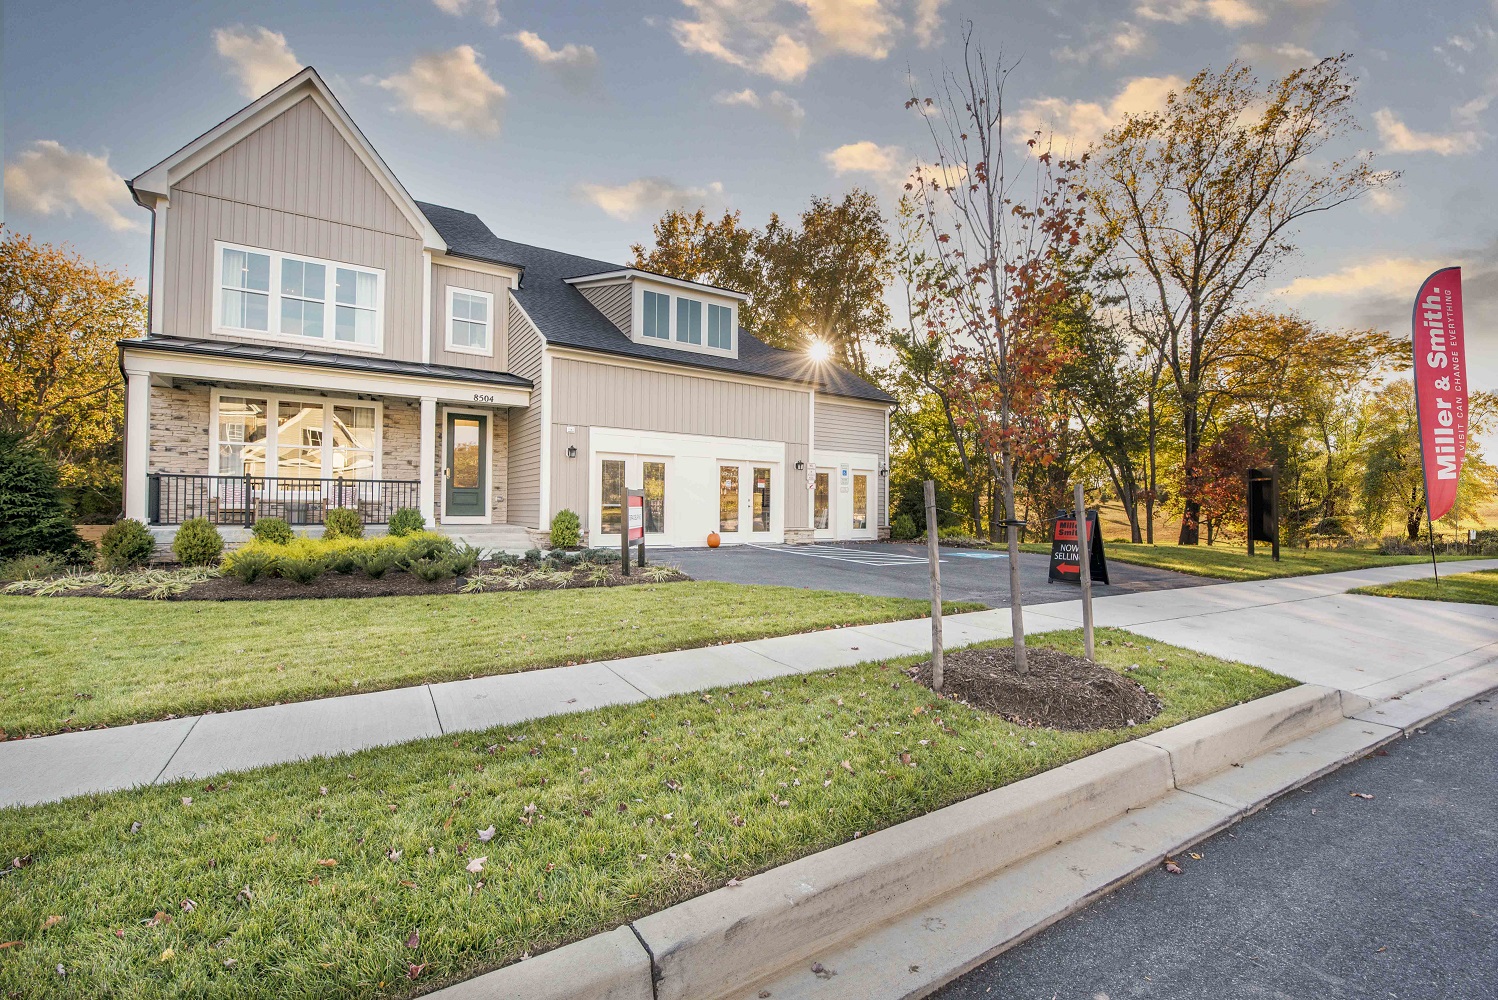 Miller & Smith recently released the final homesites at Patapsco Crossing 